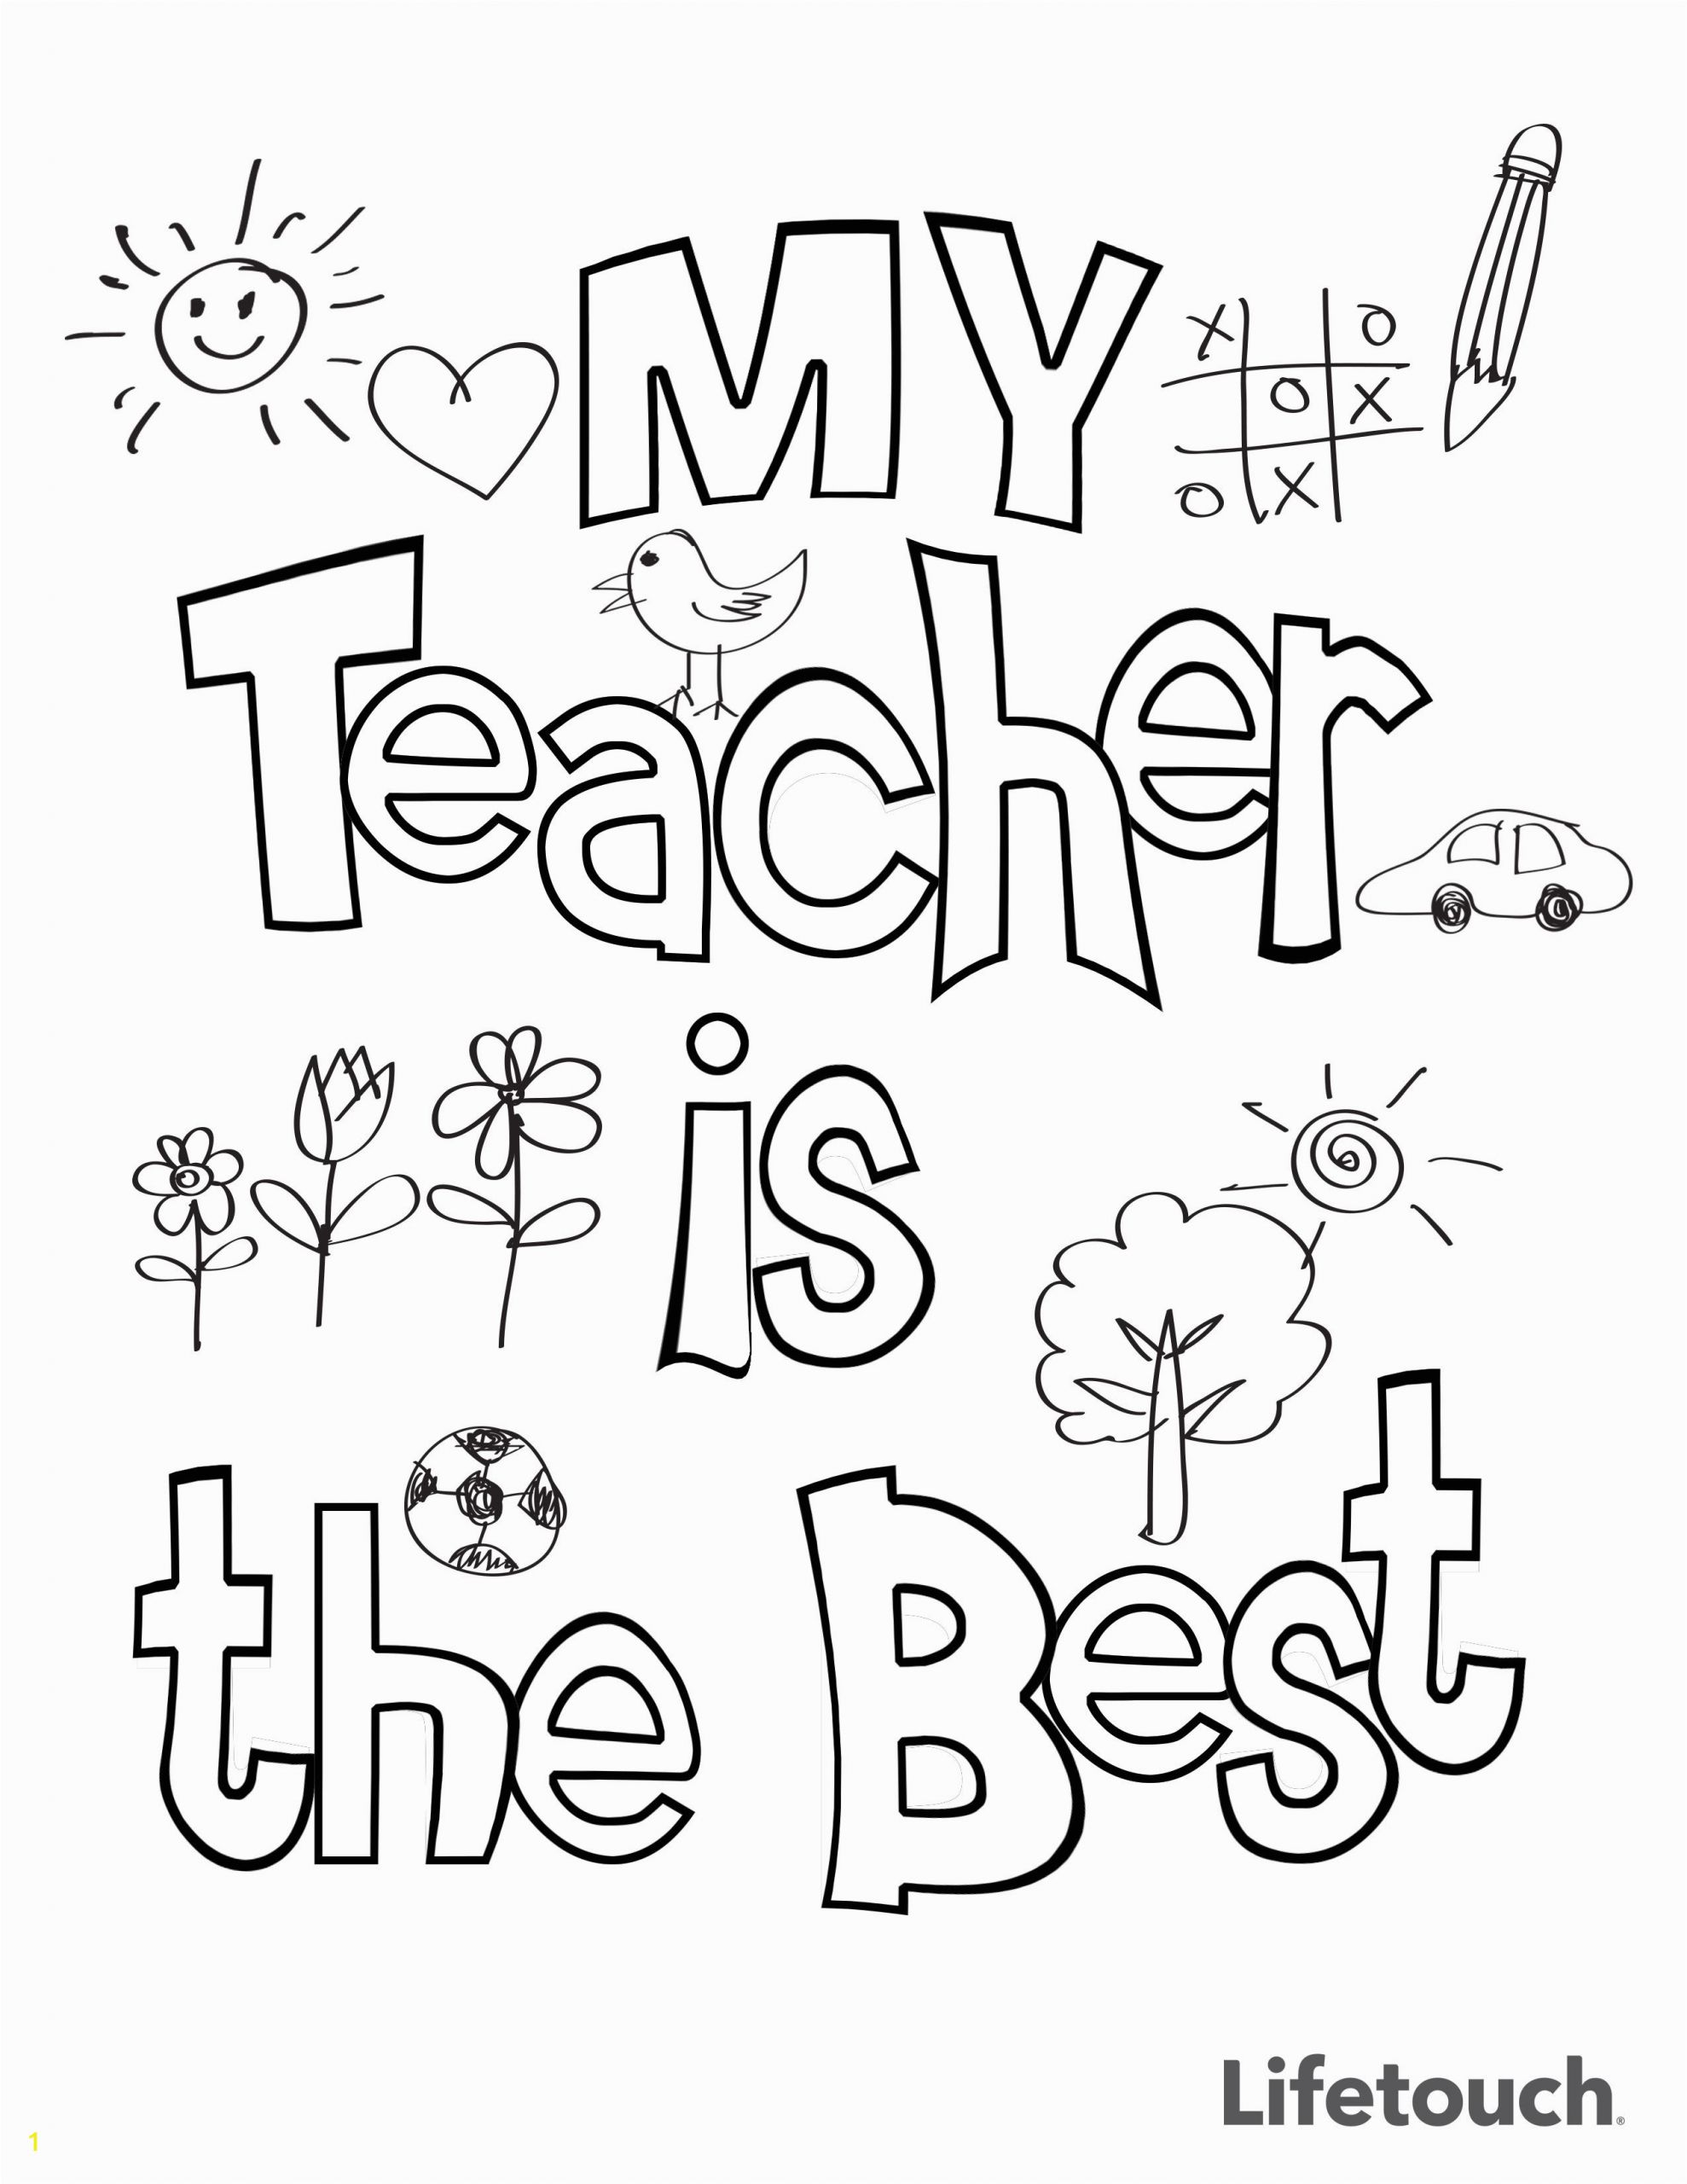 Free Printable Coloring Pages for Teachers Teacher Appreciation Coloring Sheet